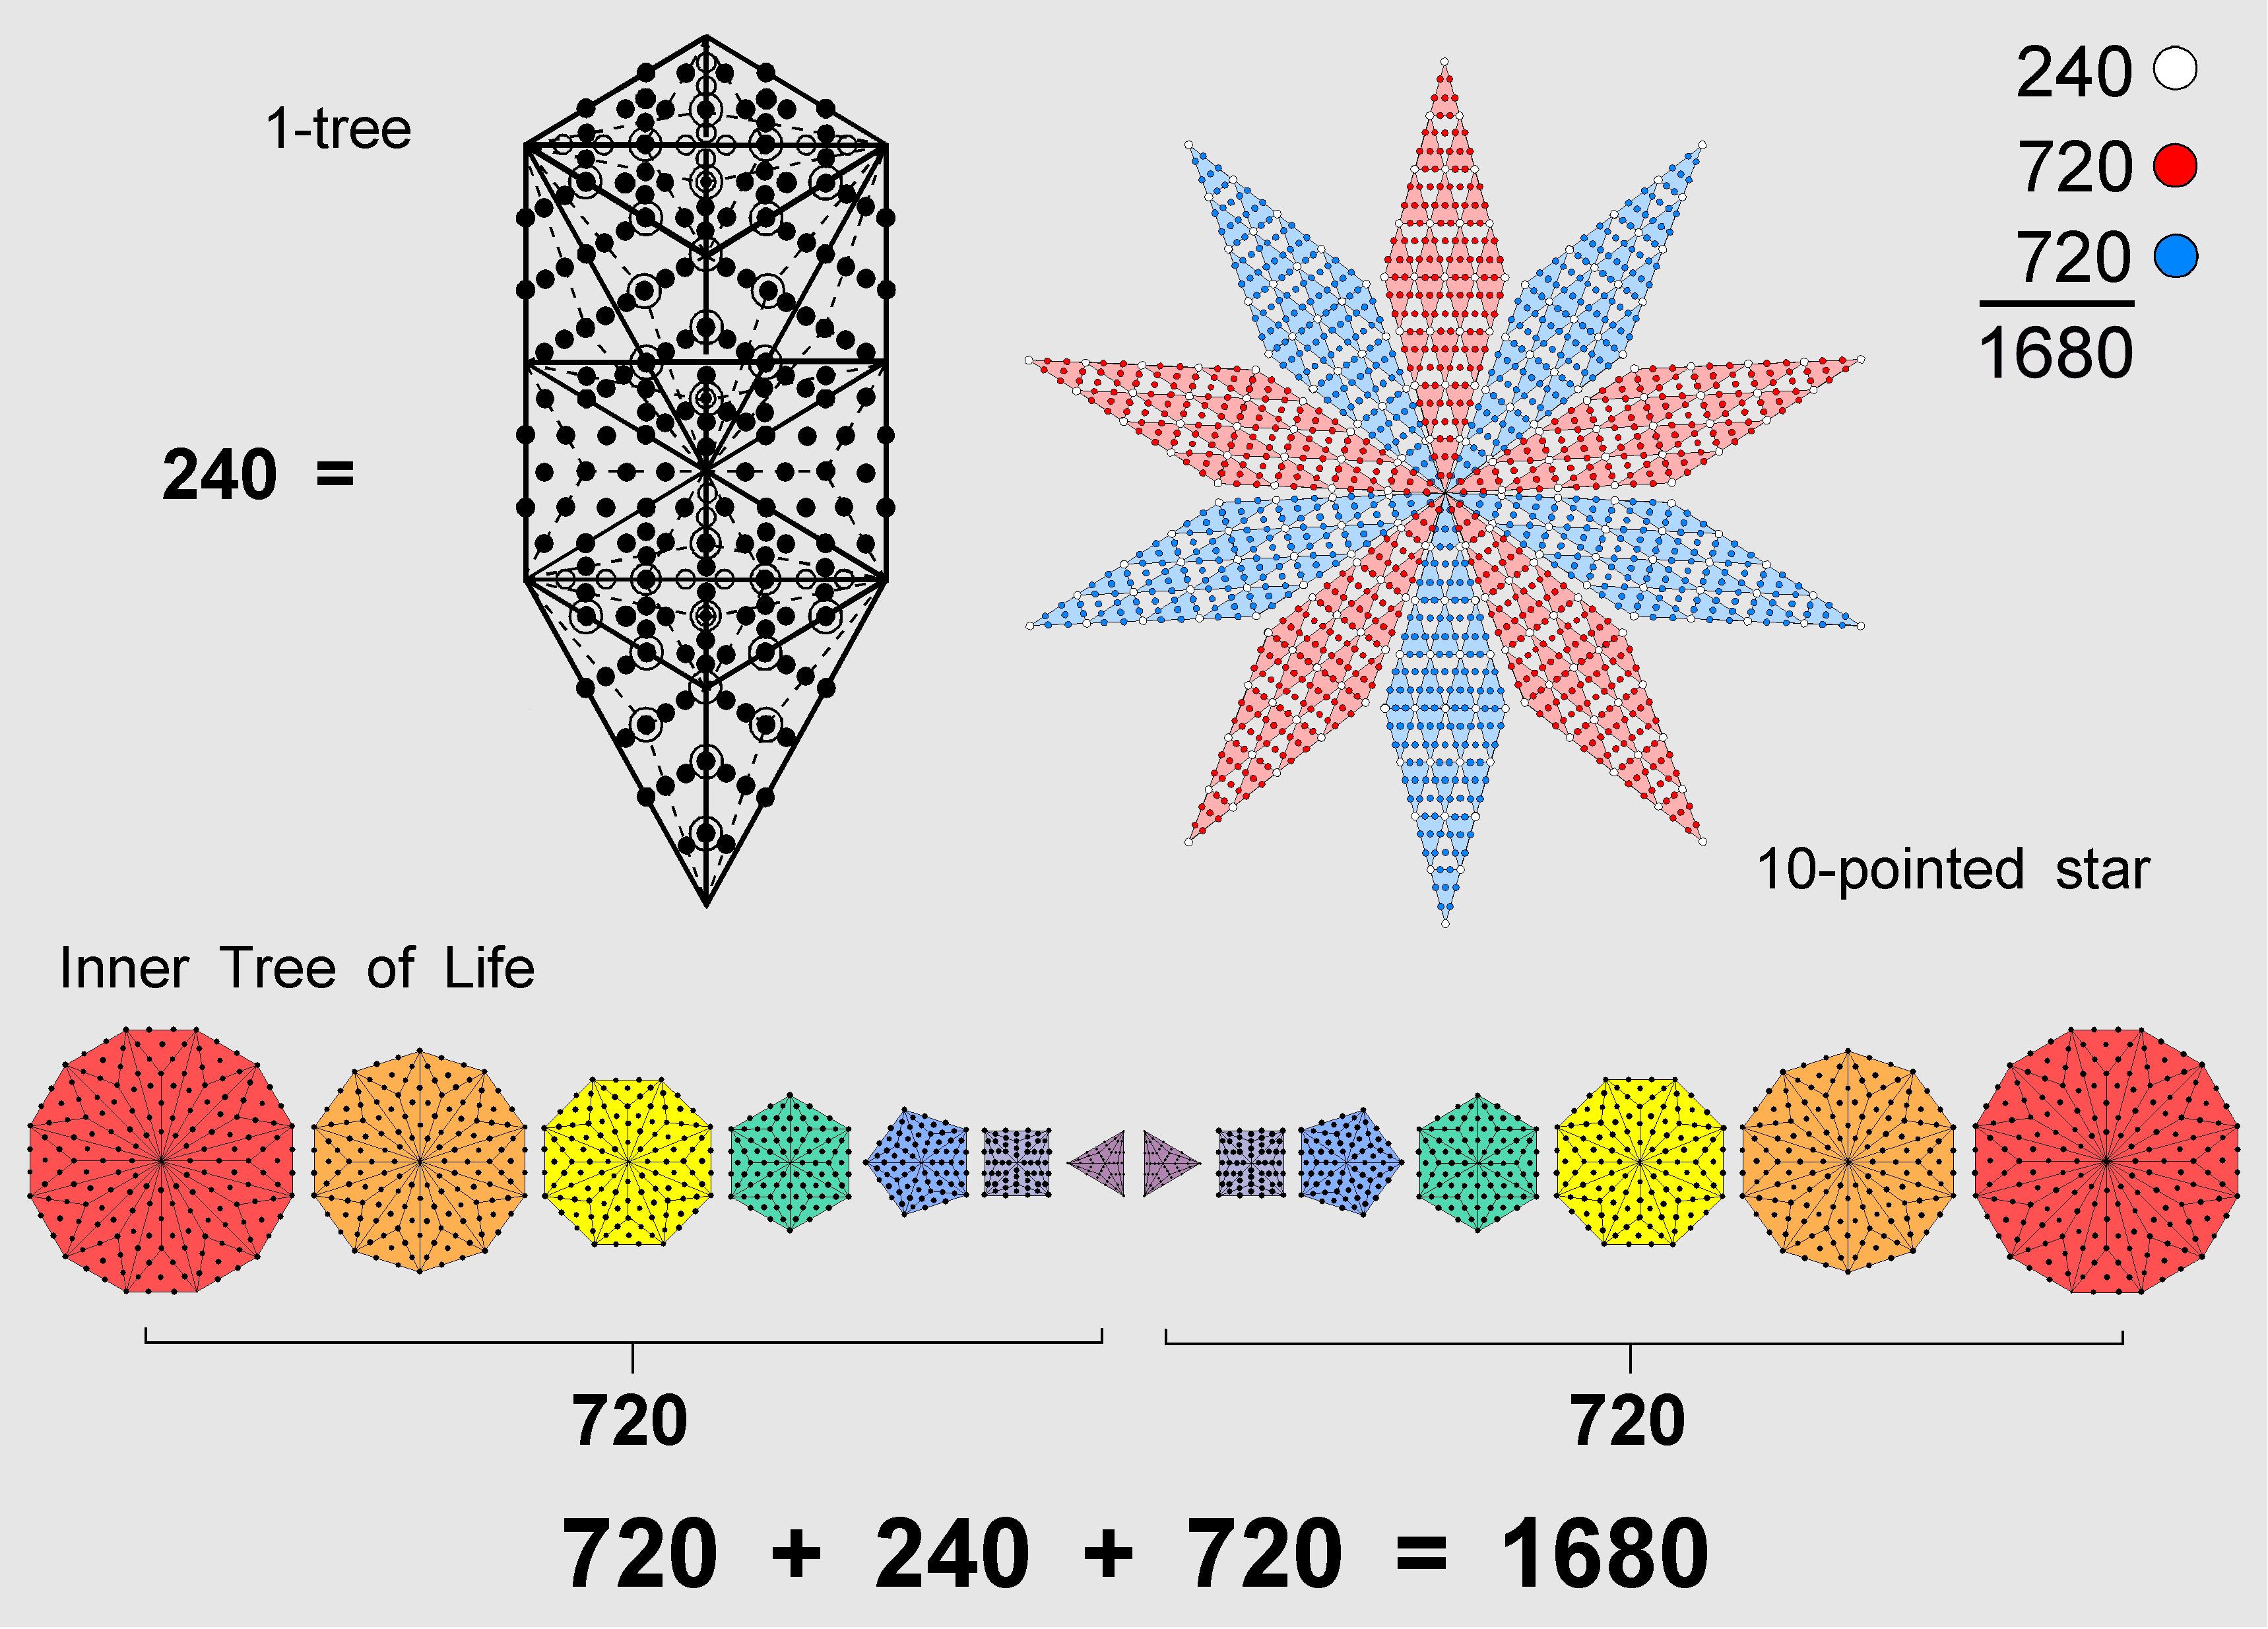 1680 yods in 10-pointed star and in 1-tree and (7+7) separate polygons